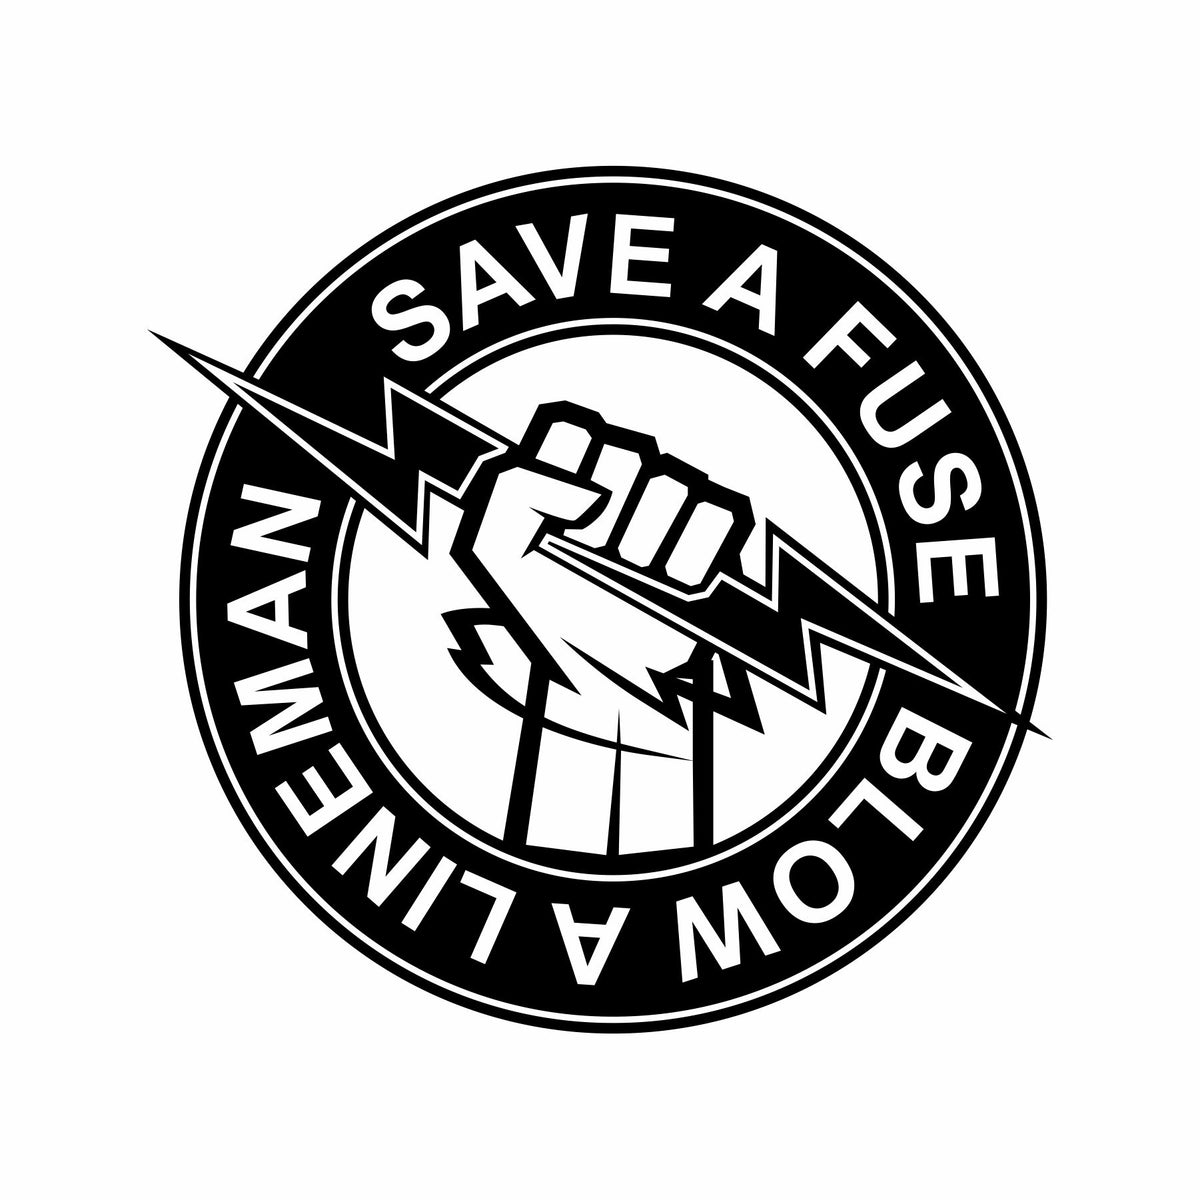 Save a Fuse Blow a Lineman - Vinyl Decal - Free Shipping